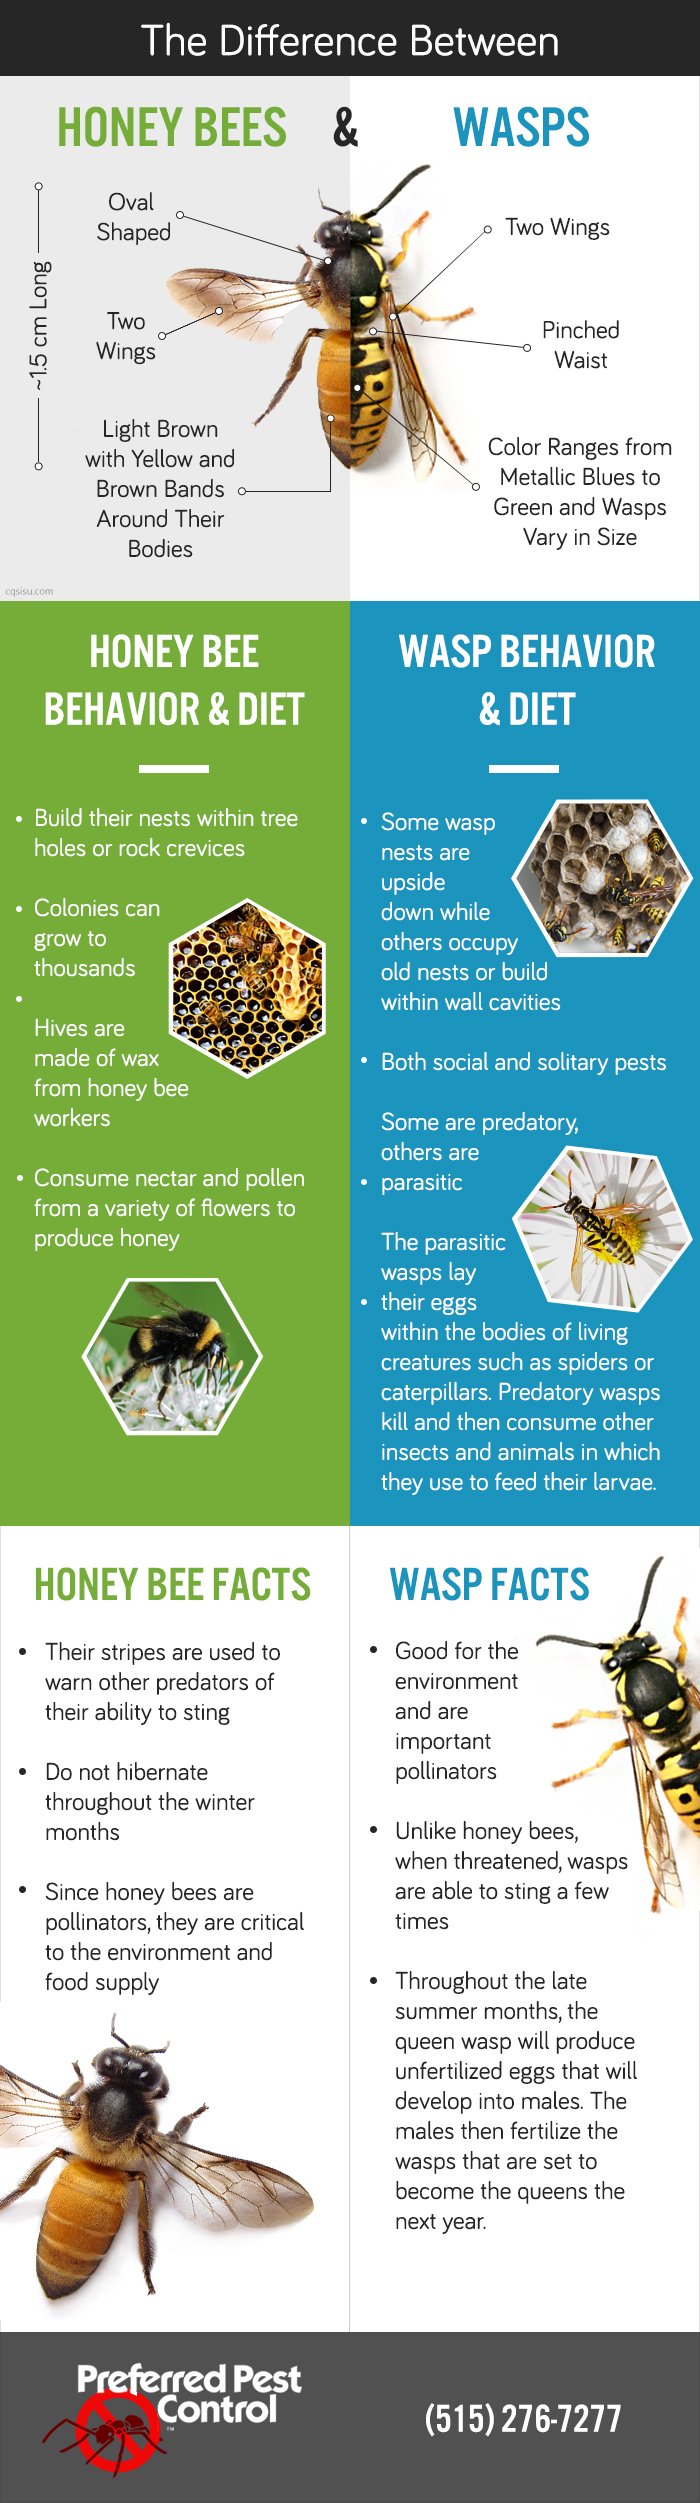 The Difference Between Honey Bees and Wasps.